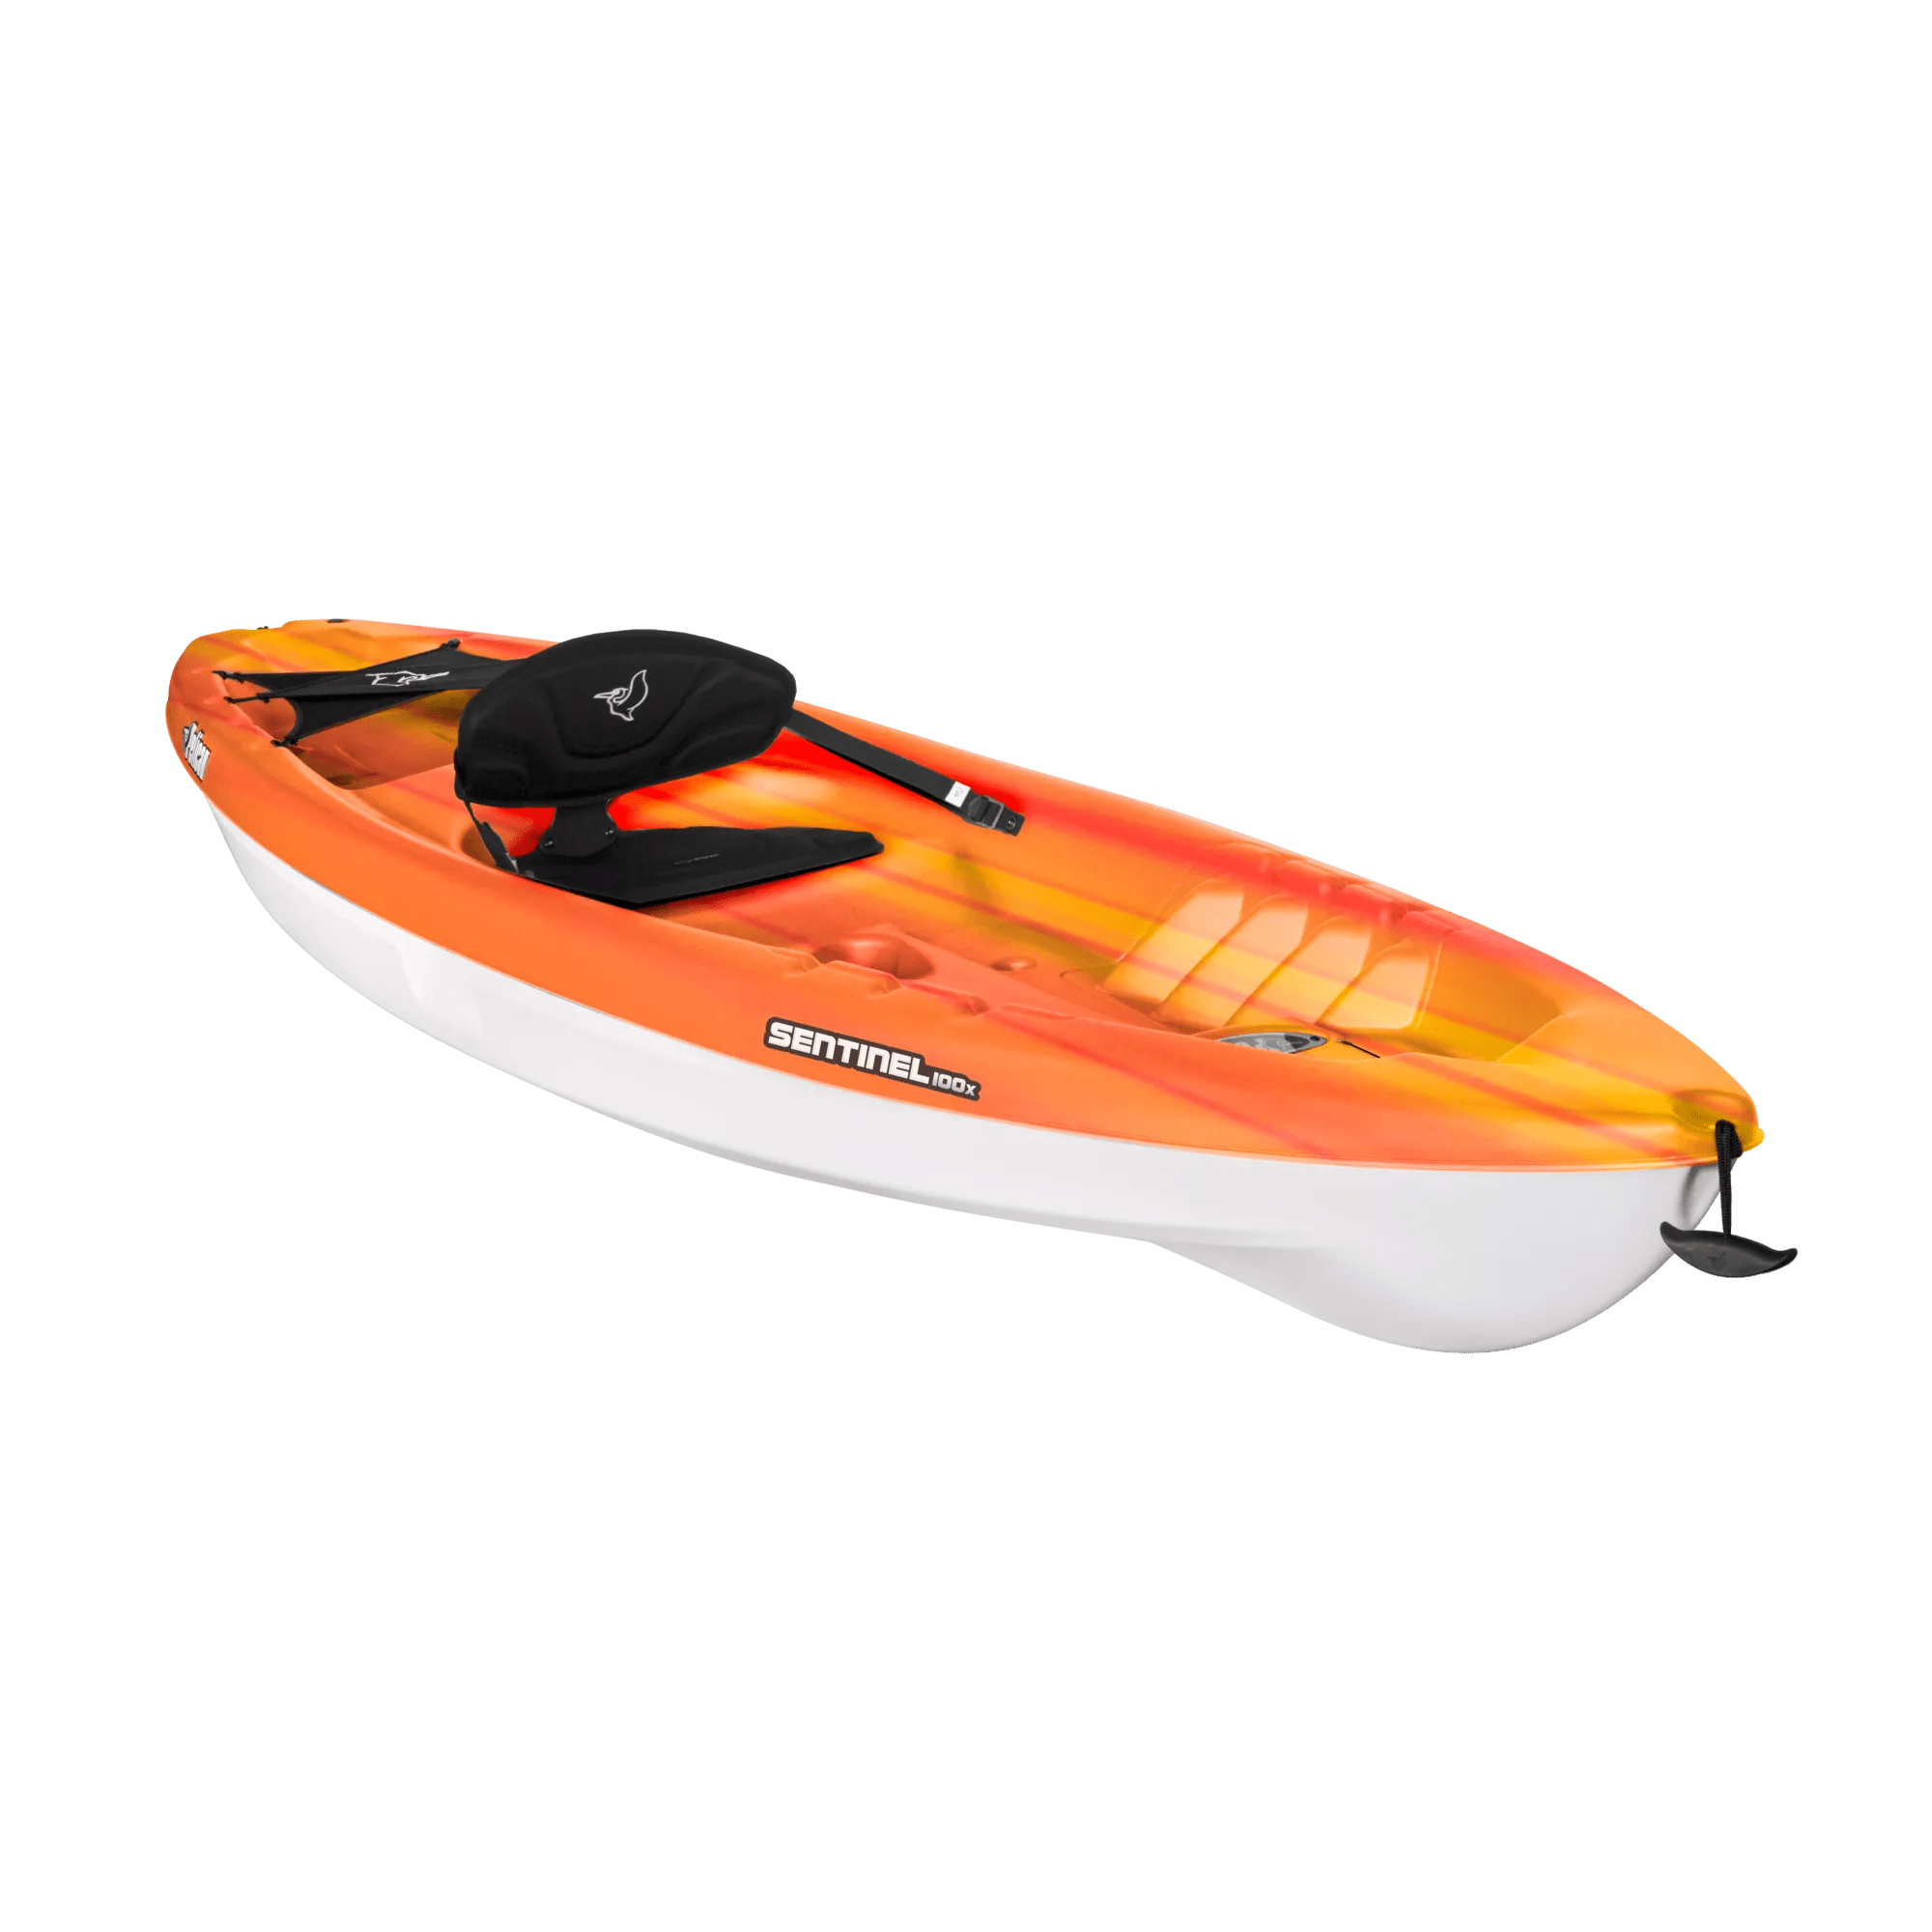 PELICAN - Sentinel 100X Recreational Kayak - Discontinued color/model - Red - KVF10P100-00 - ISO 